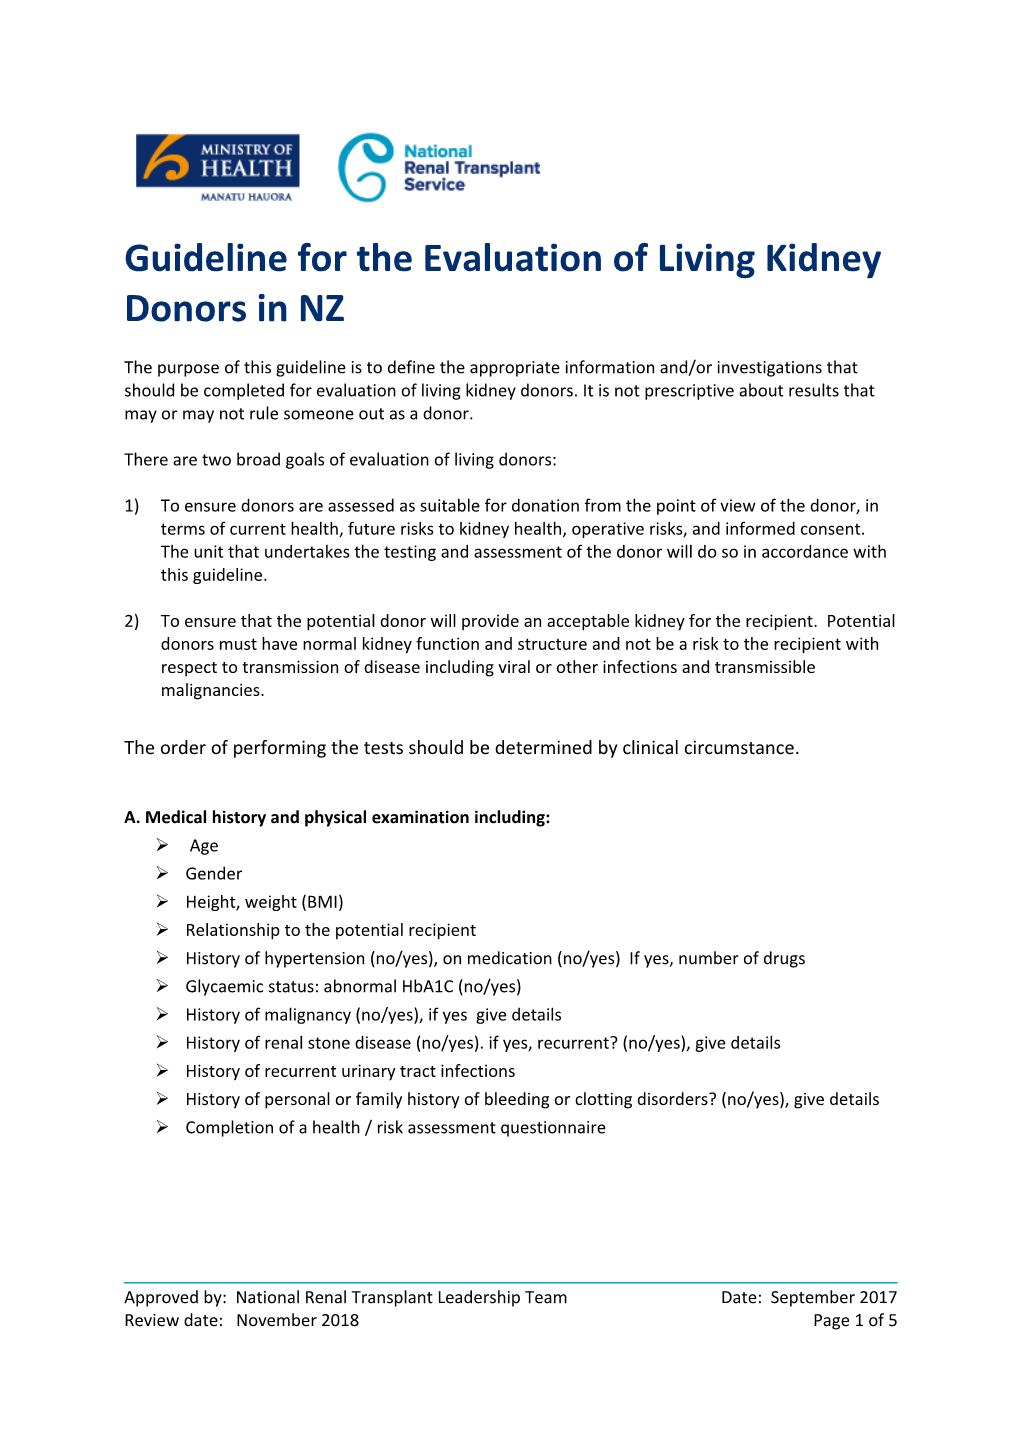 Guideline for the Evaluation of Living Kidney Donors in NZ